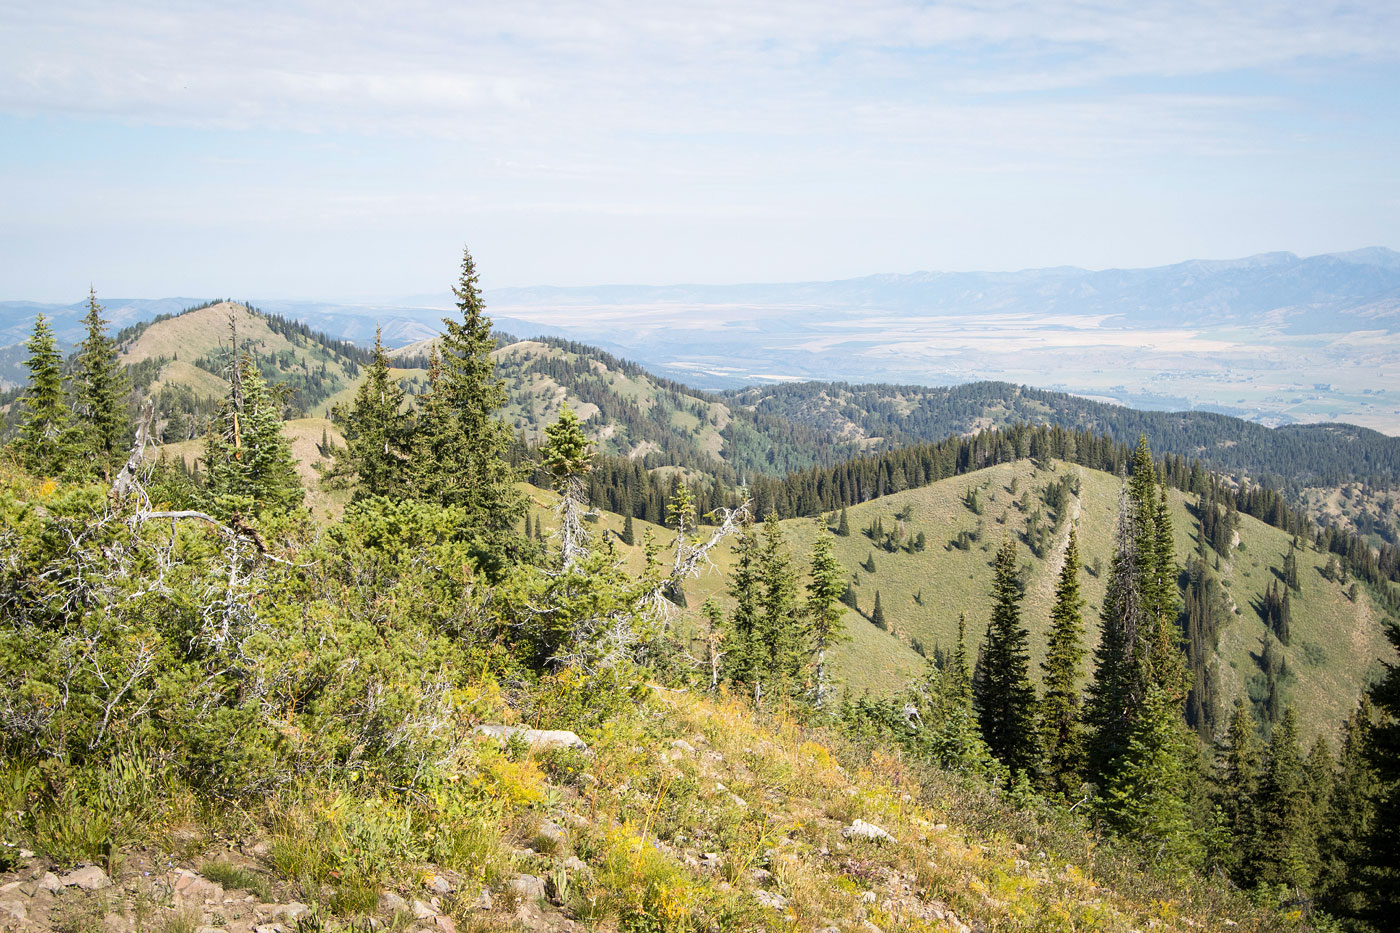 Hike Red Ridge via Russell Creek Trail in Caribou-Targhee National Forest, Idaho - Stav is Lost